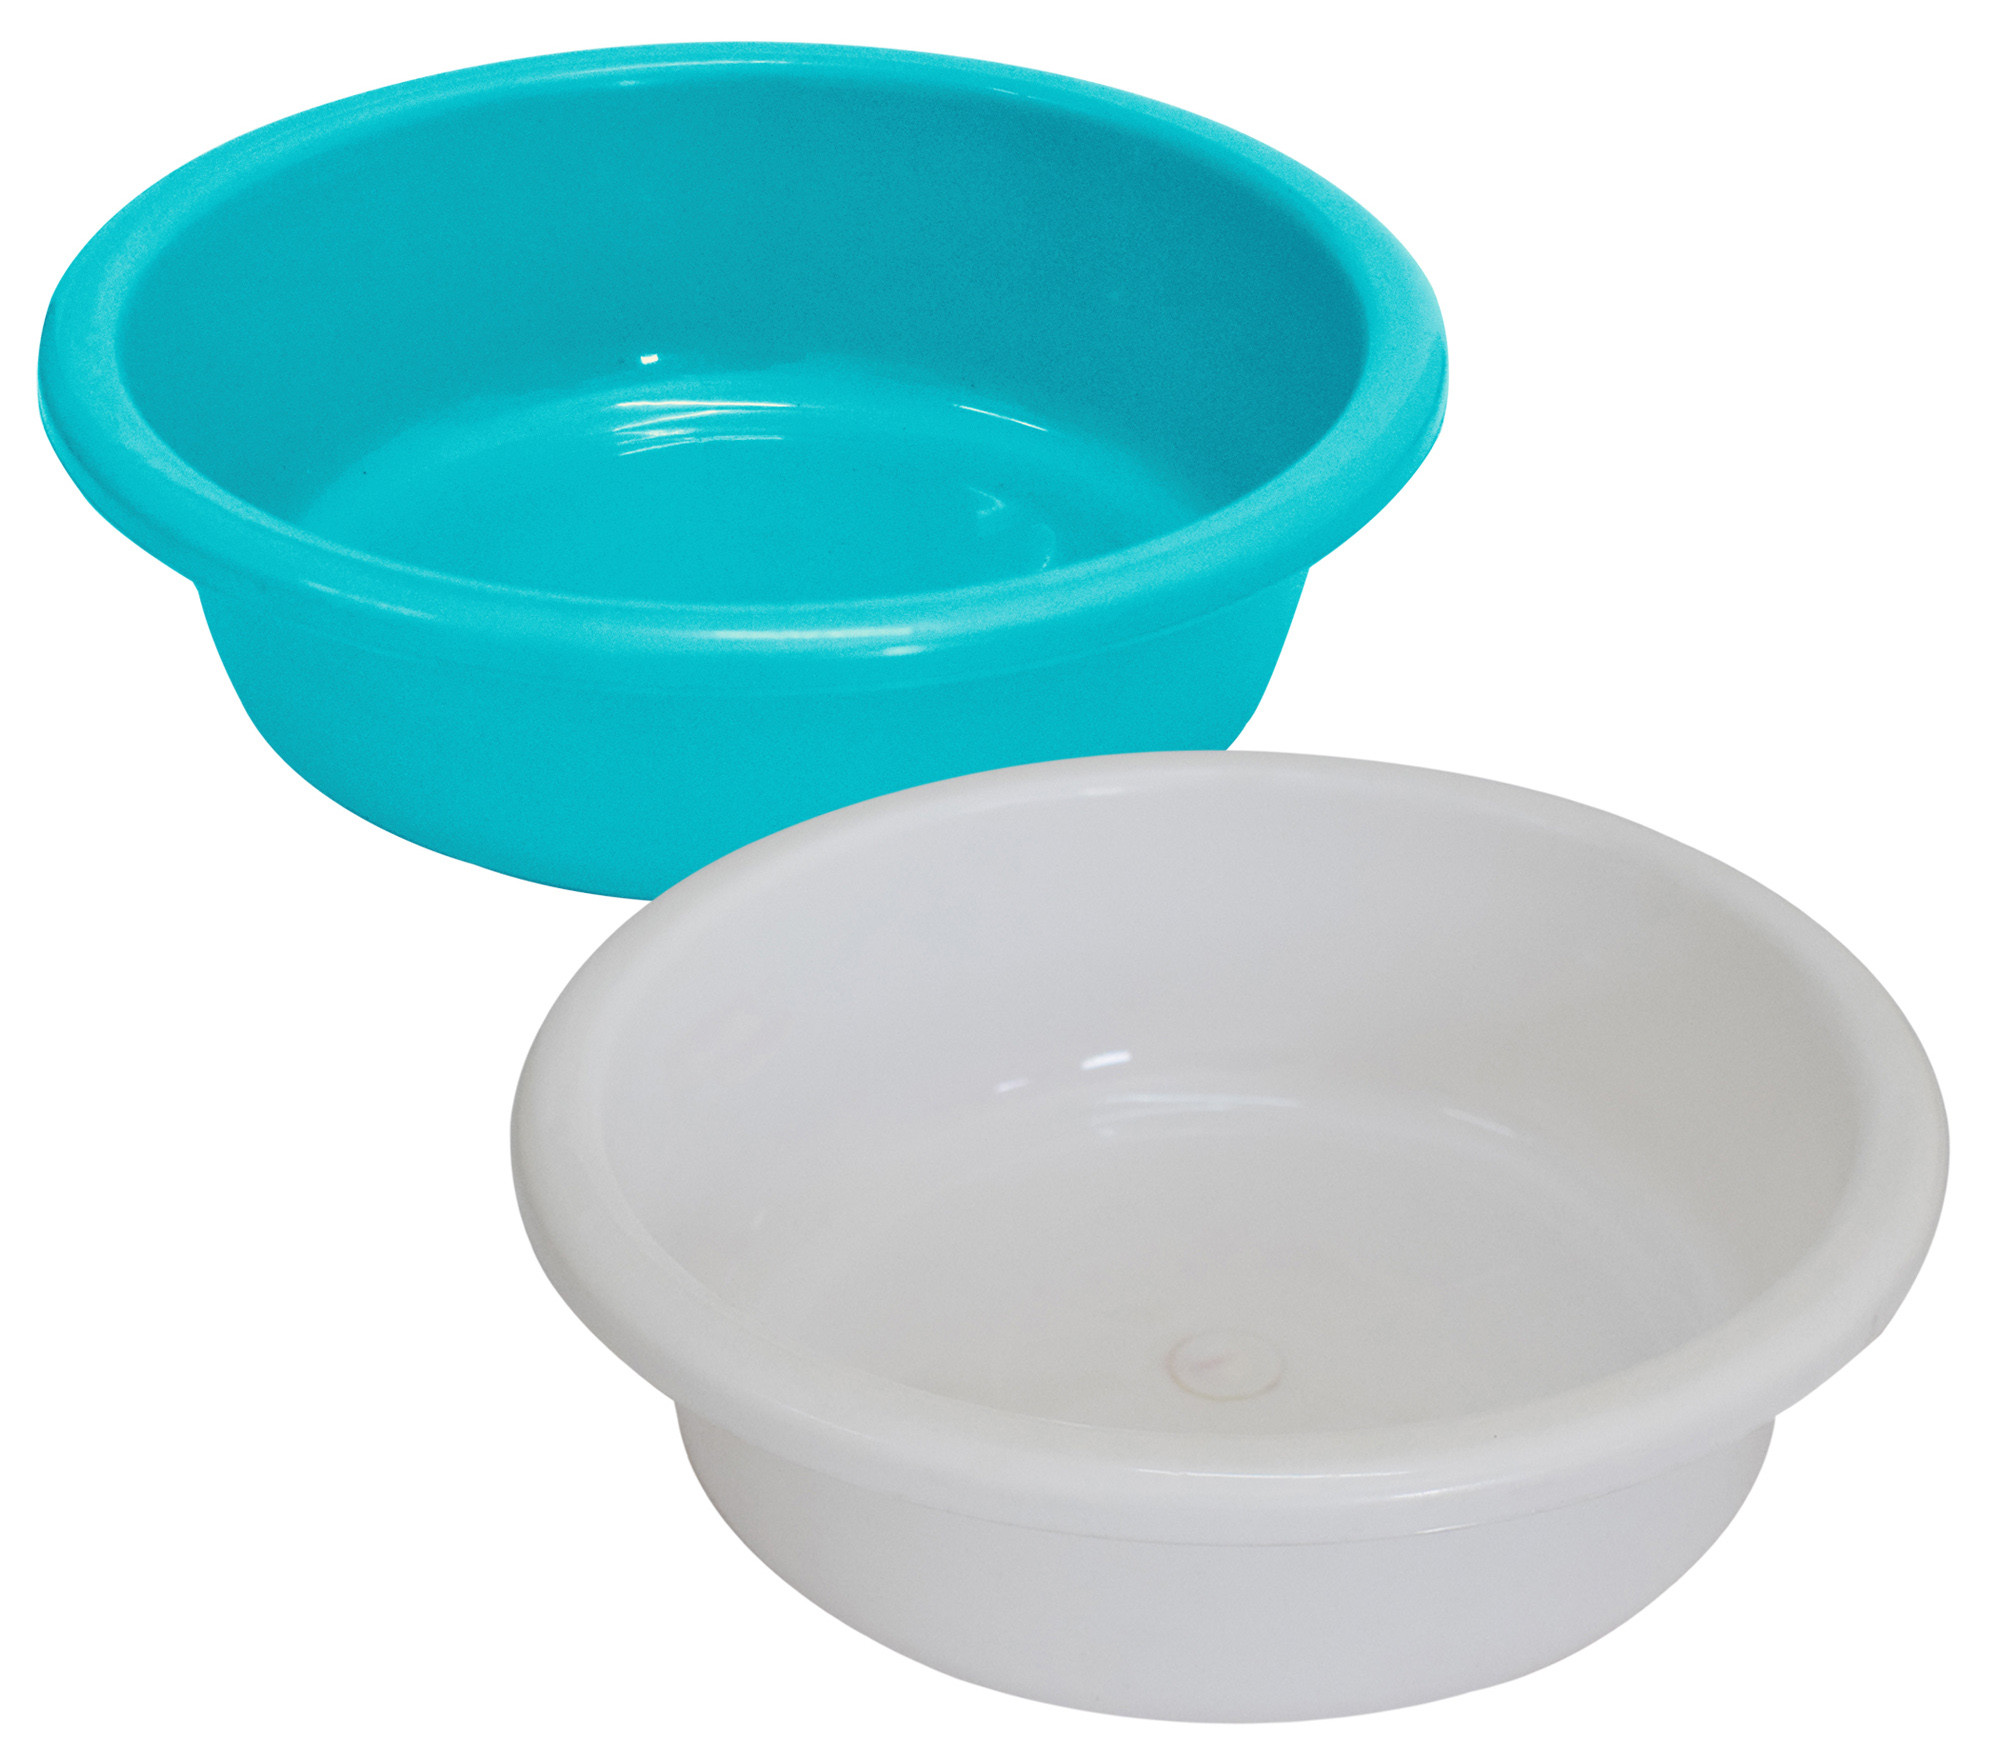 Kuber Industries Multiuses Unbreakable Plastic Knead Dough Basket/Basin Bowl For Home & Kitchen 6 Ltr- Pack of 2 (Sky Blue & White)